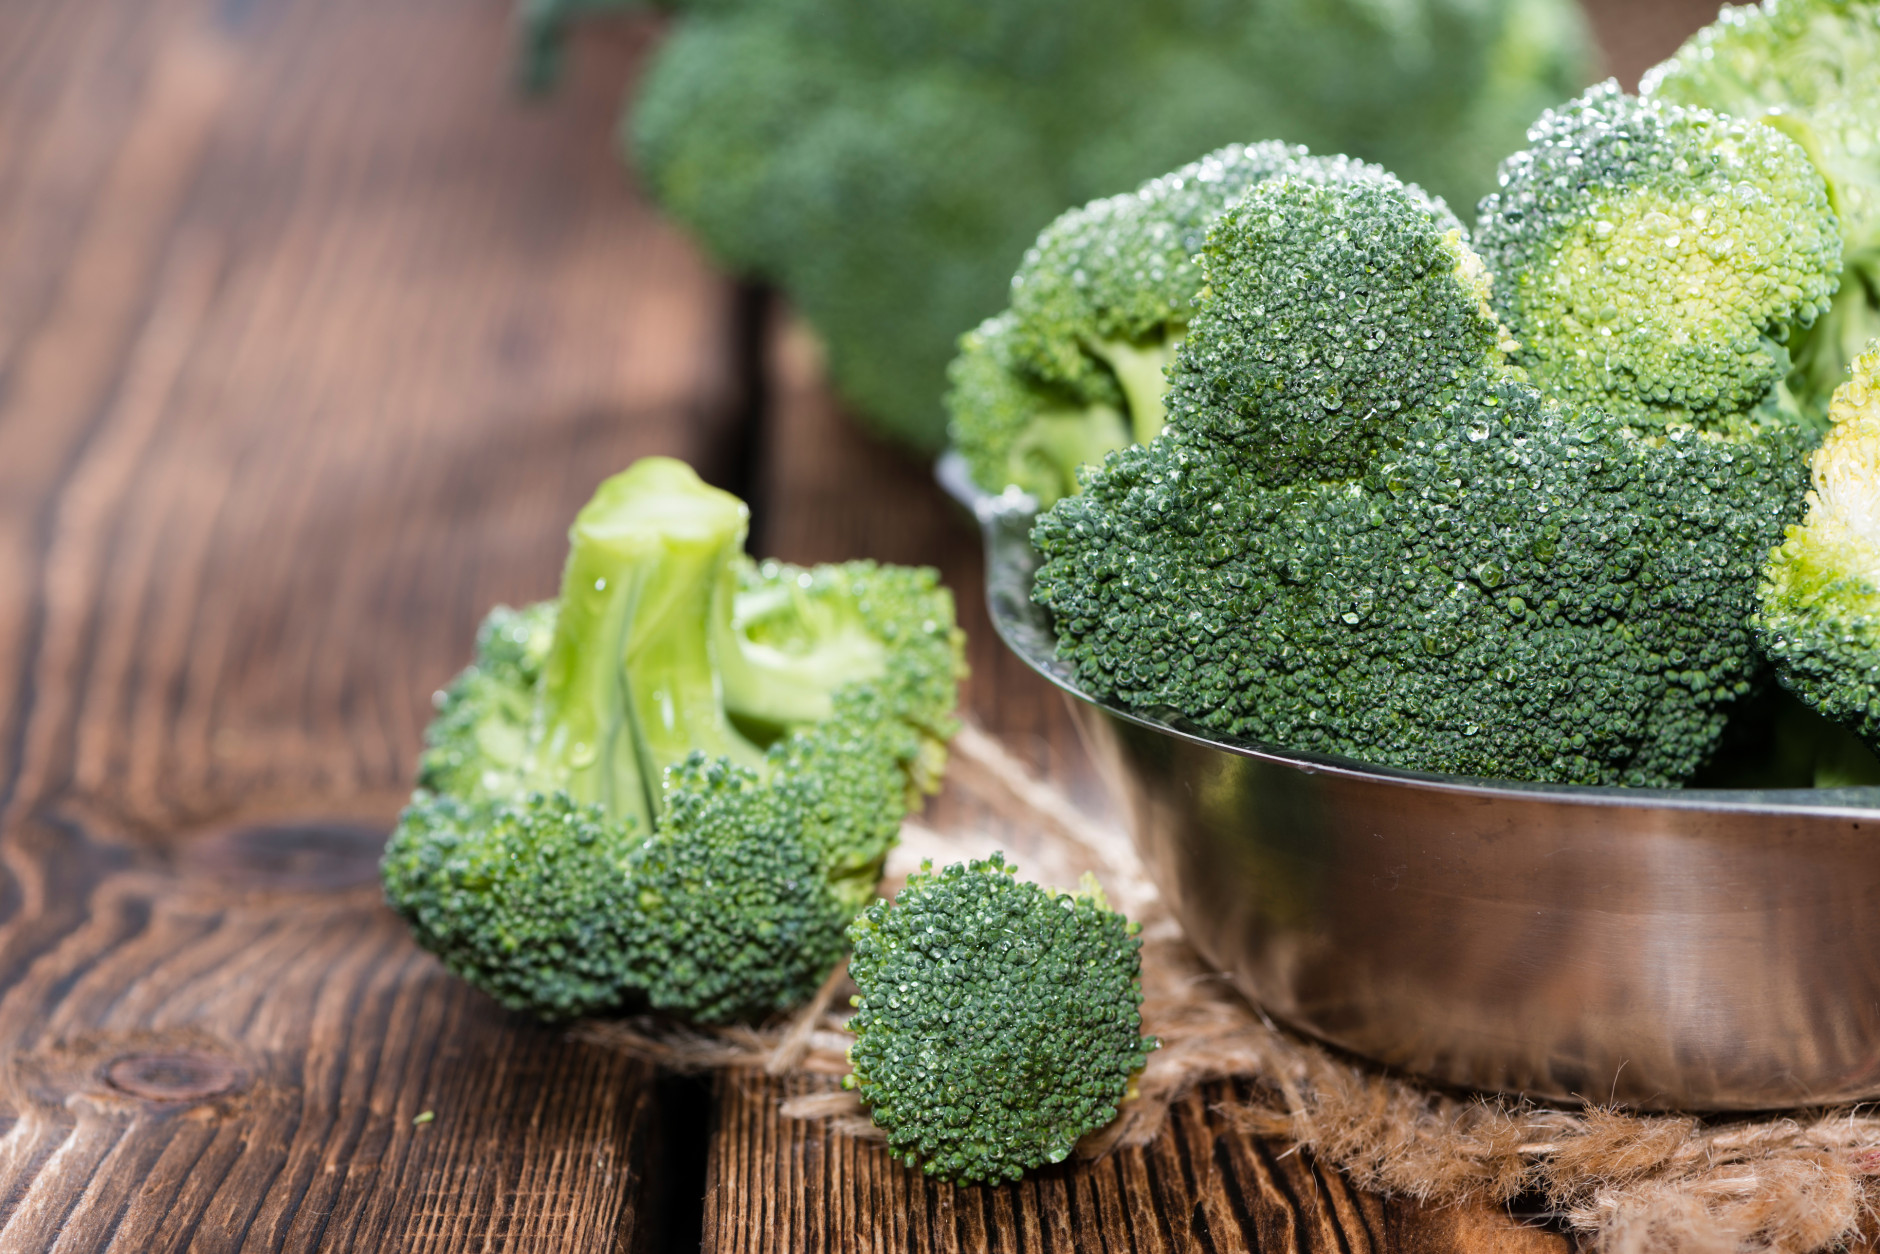 Raw Broccoli (detailed close-up shot) on wooden background